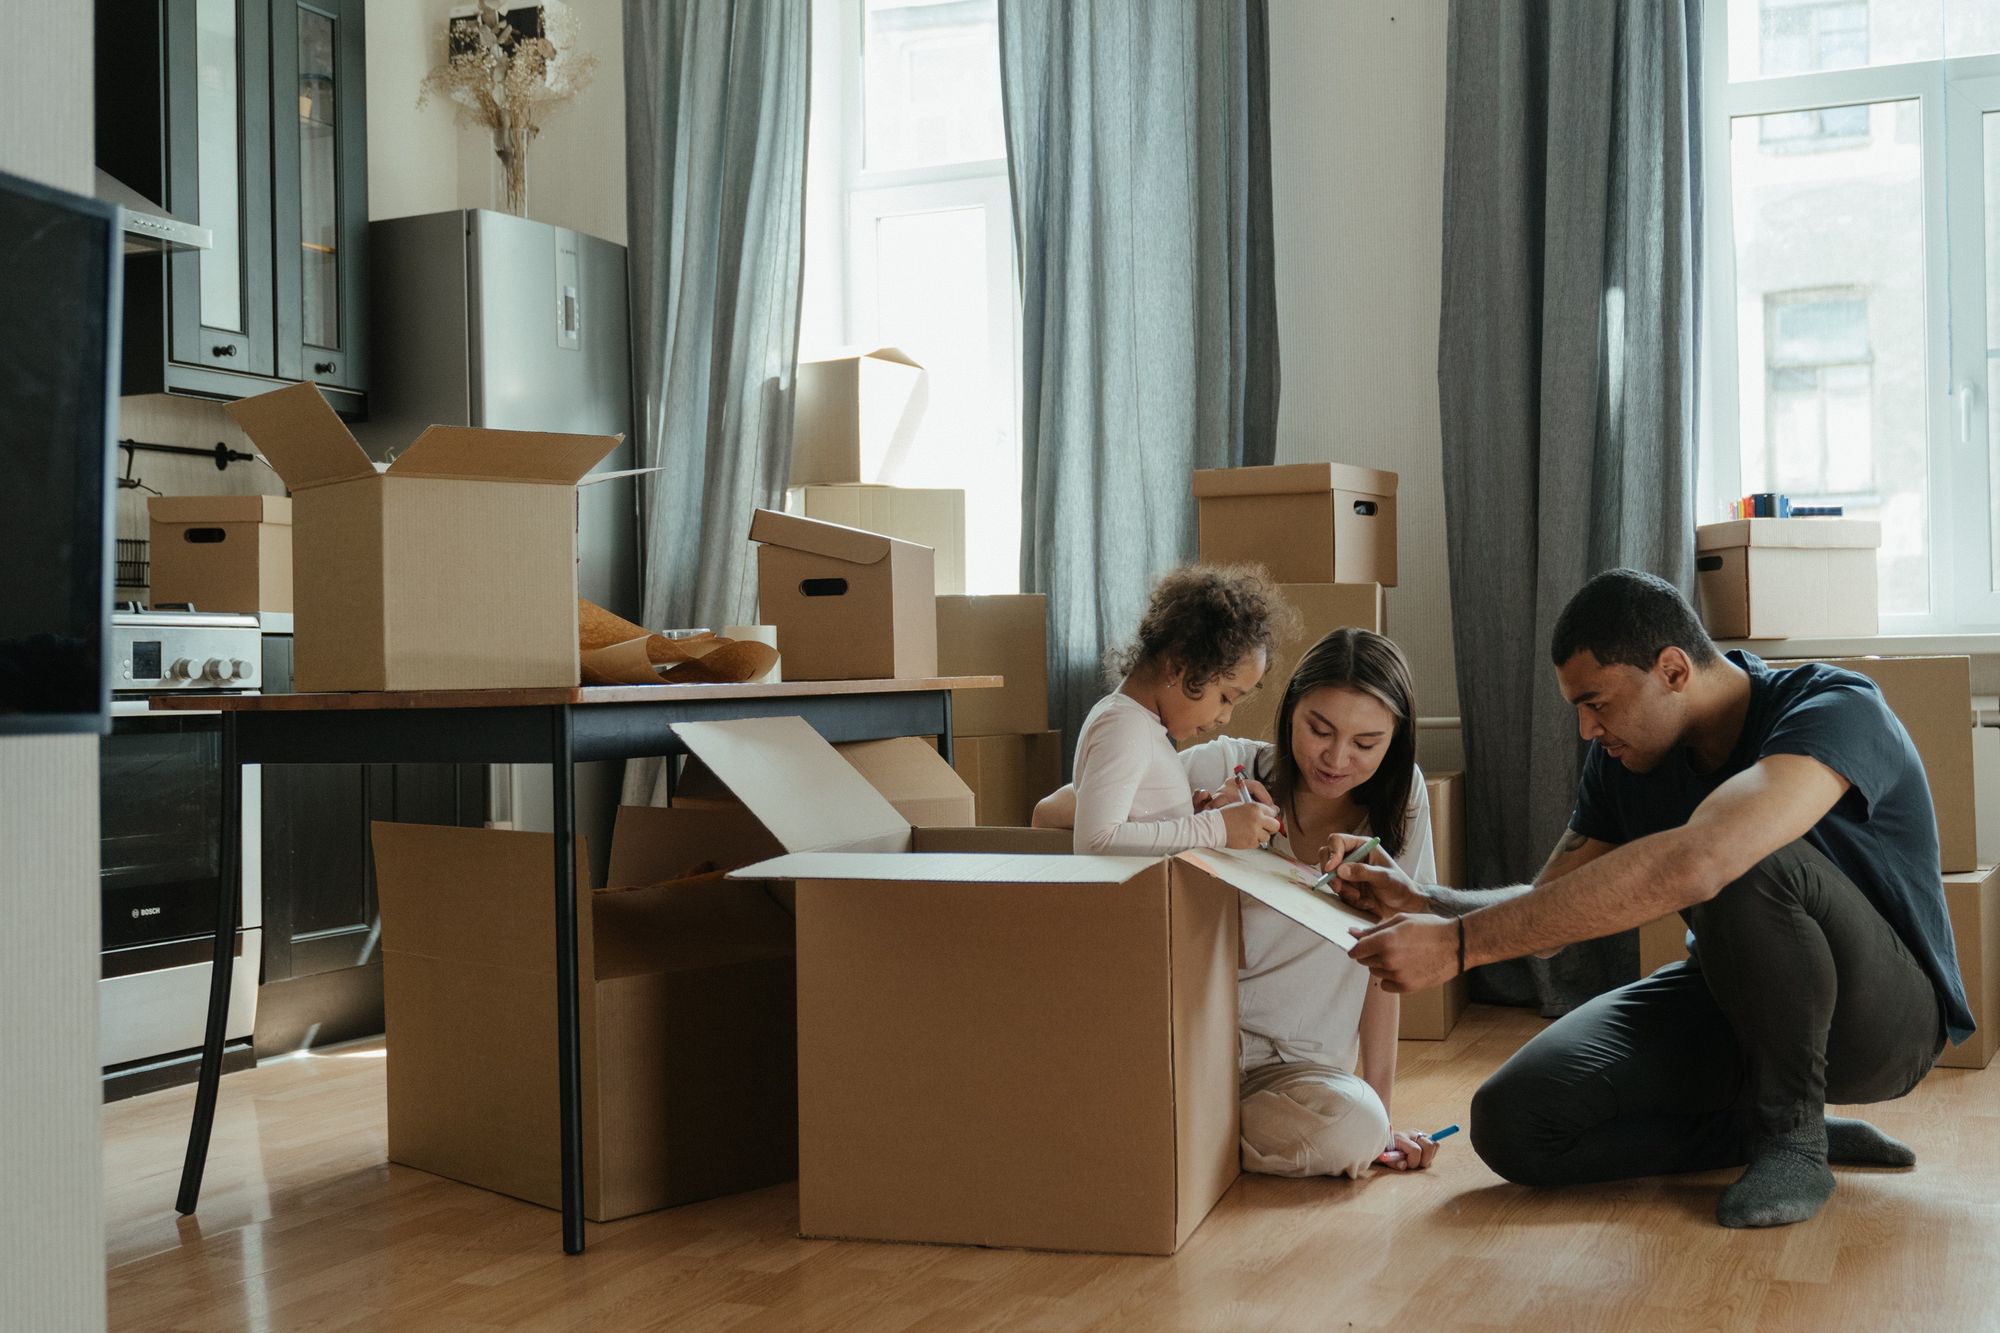 A family with boxes around as they move into a new house.